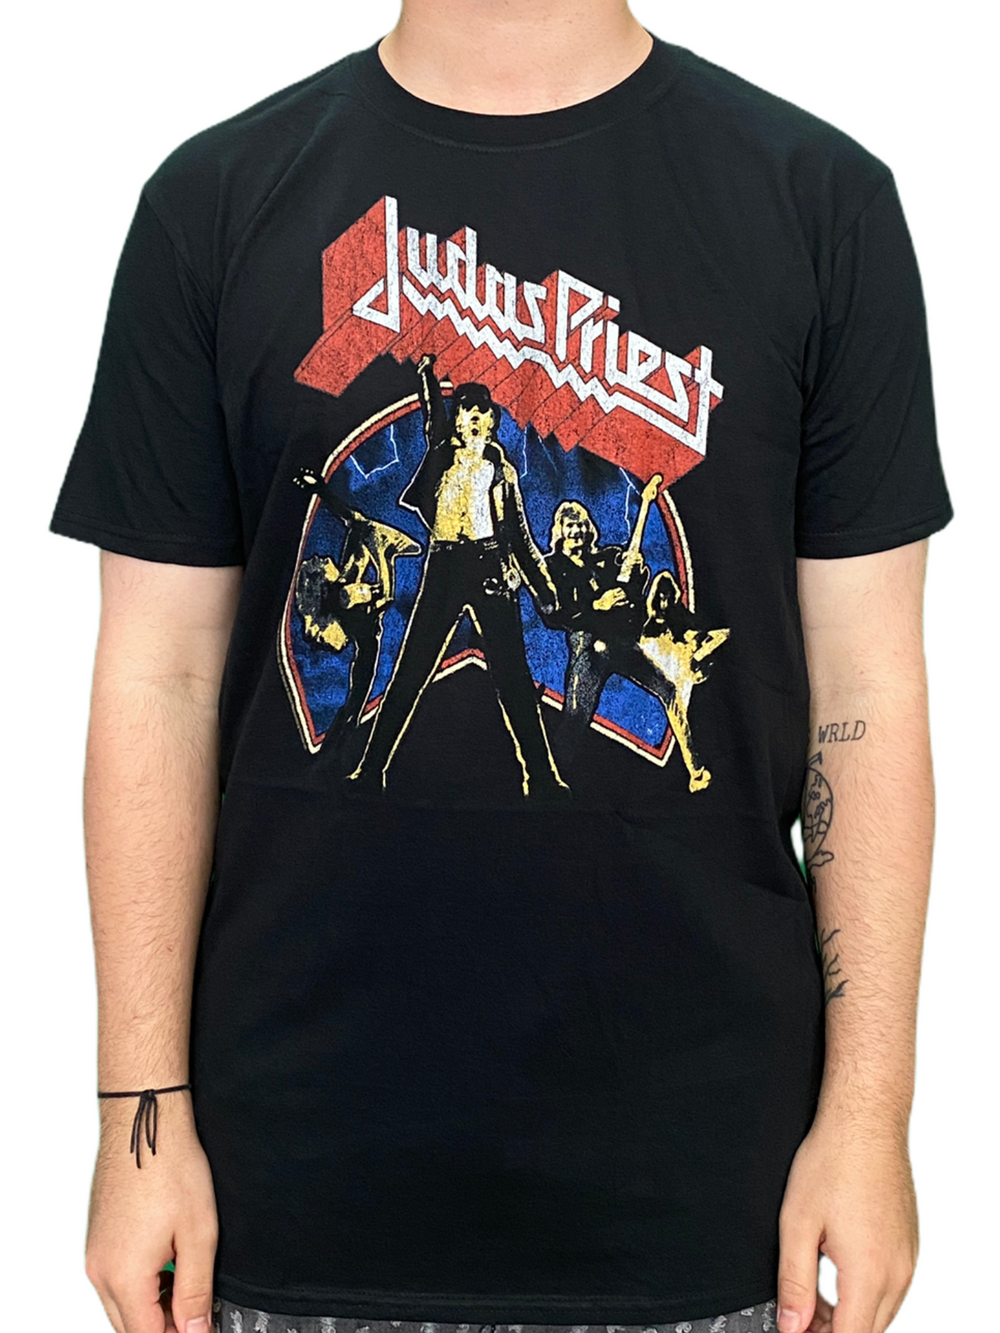 Judas Priest Unleashed V2 Unisex Official T Shirt Brand New Various Sizes